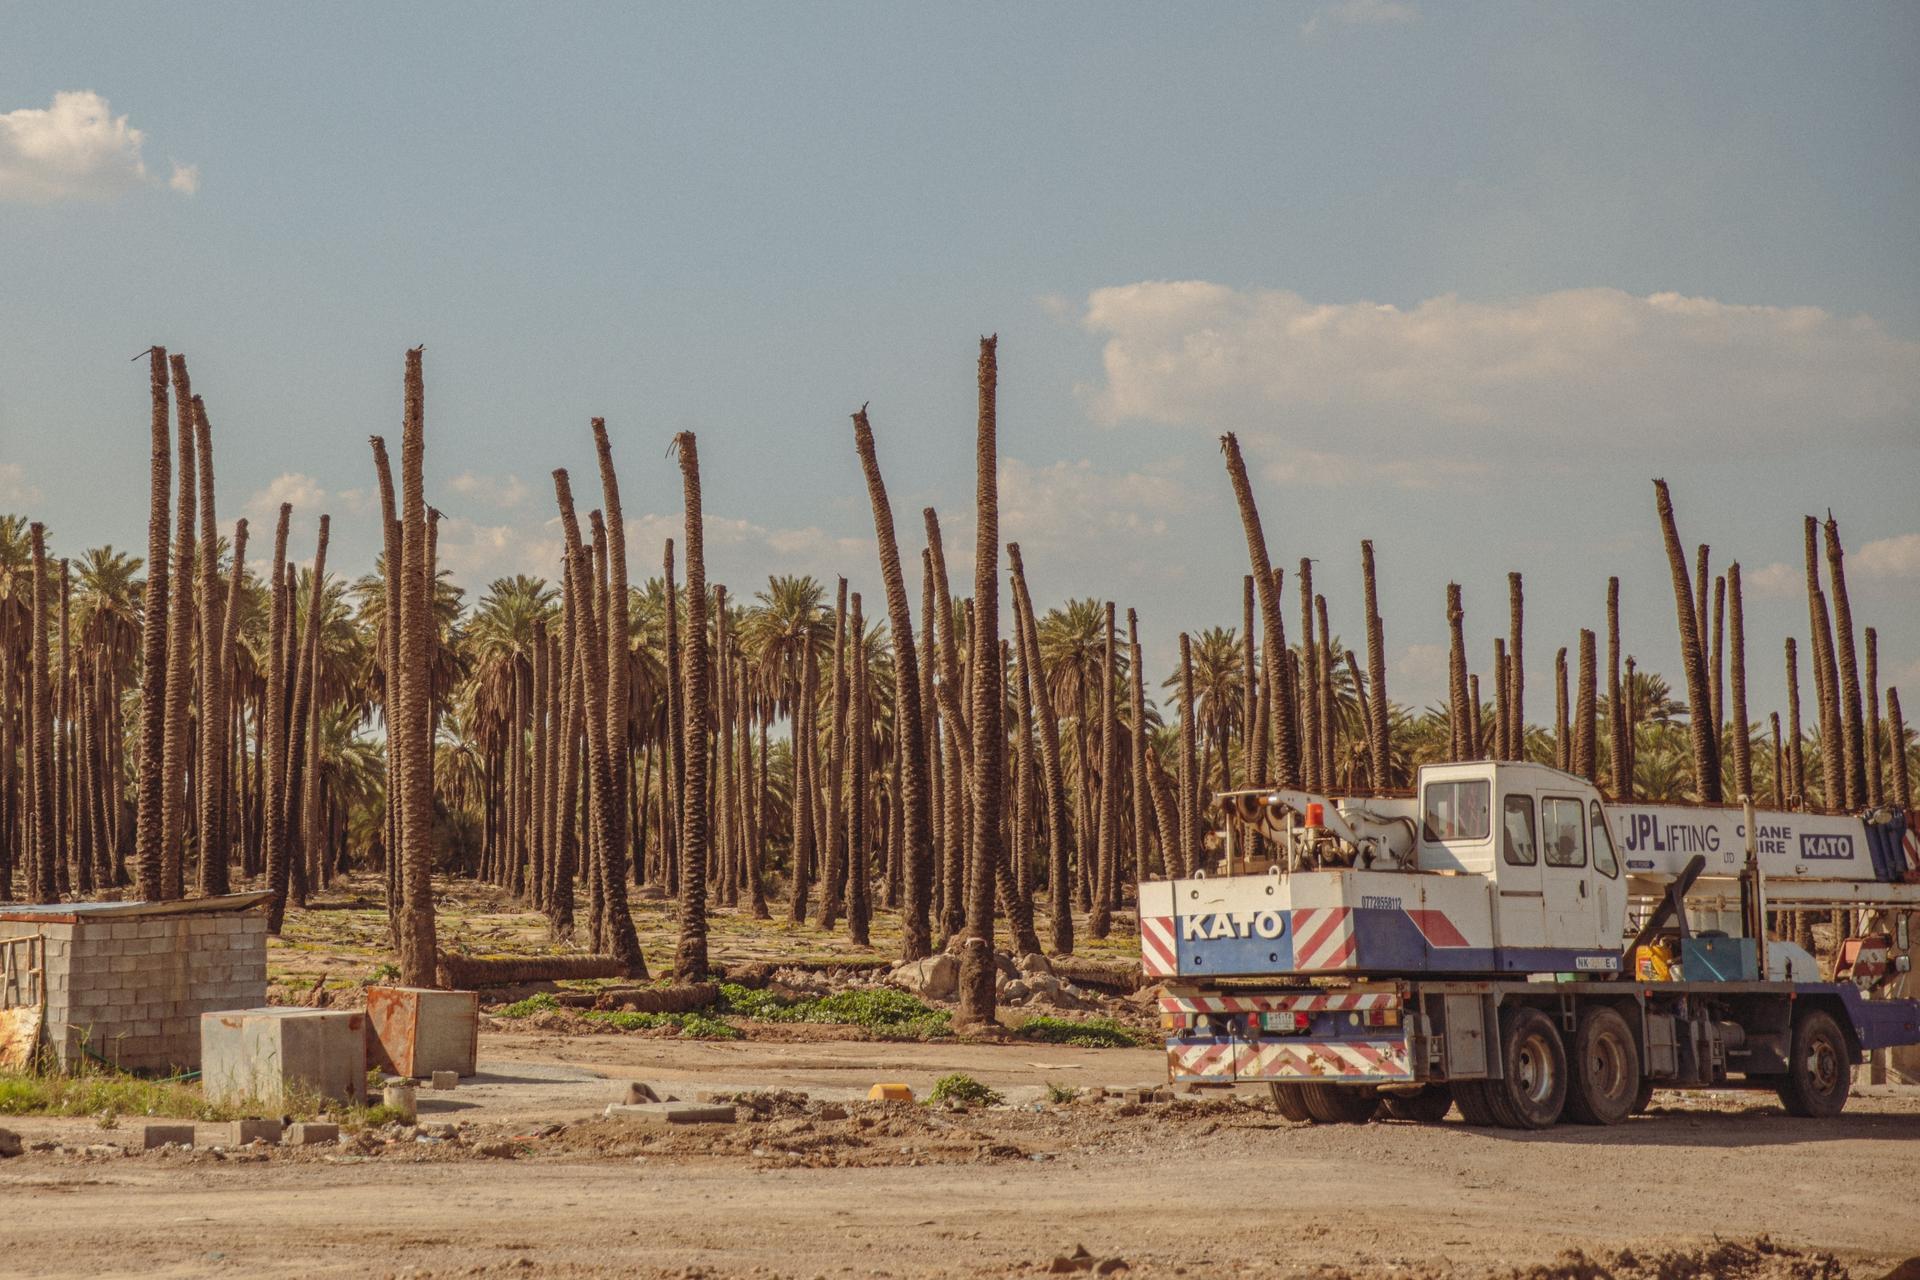 Iraq used to be among the top producers of dates in the world, but war, construction and the impact of climate change have taken a toll on the country's palm trees.